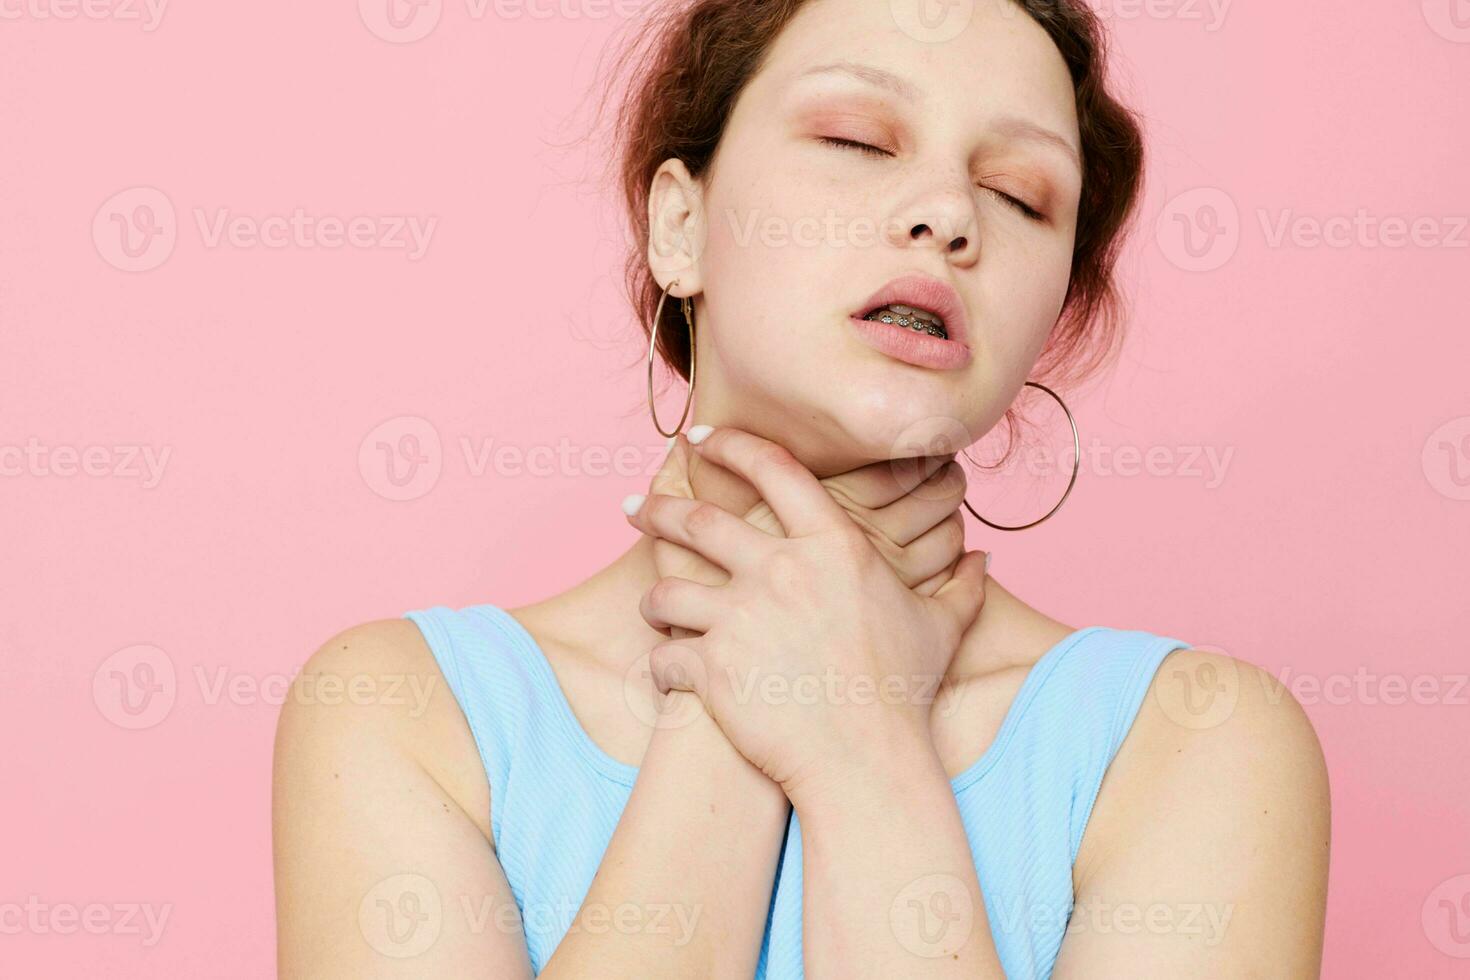 woman in blue t-shirt strangles herself emotions pink background photo